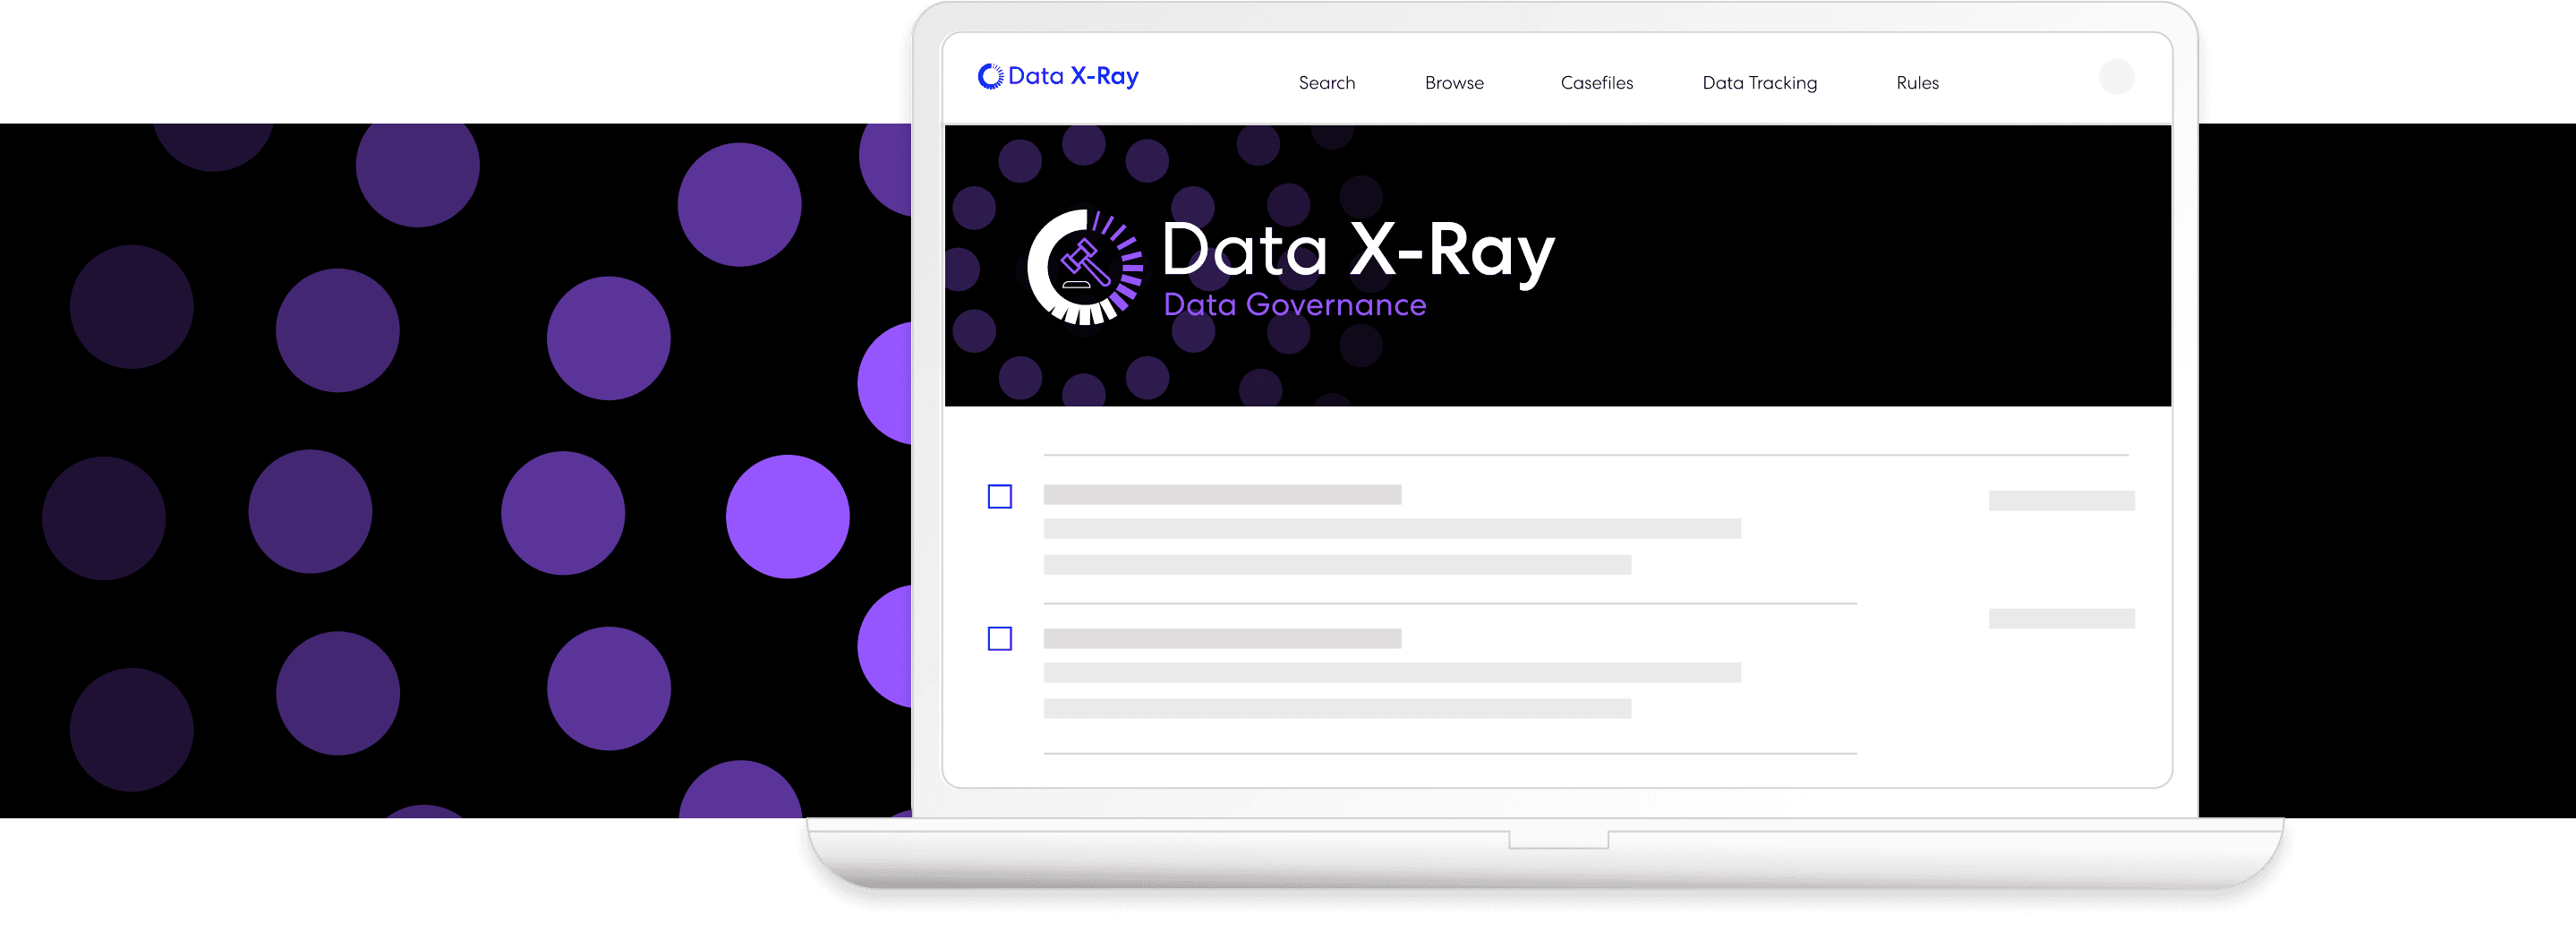 Data X-Ray to automate unstructured data governance